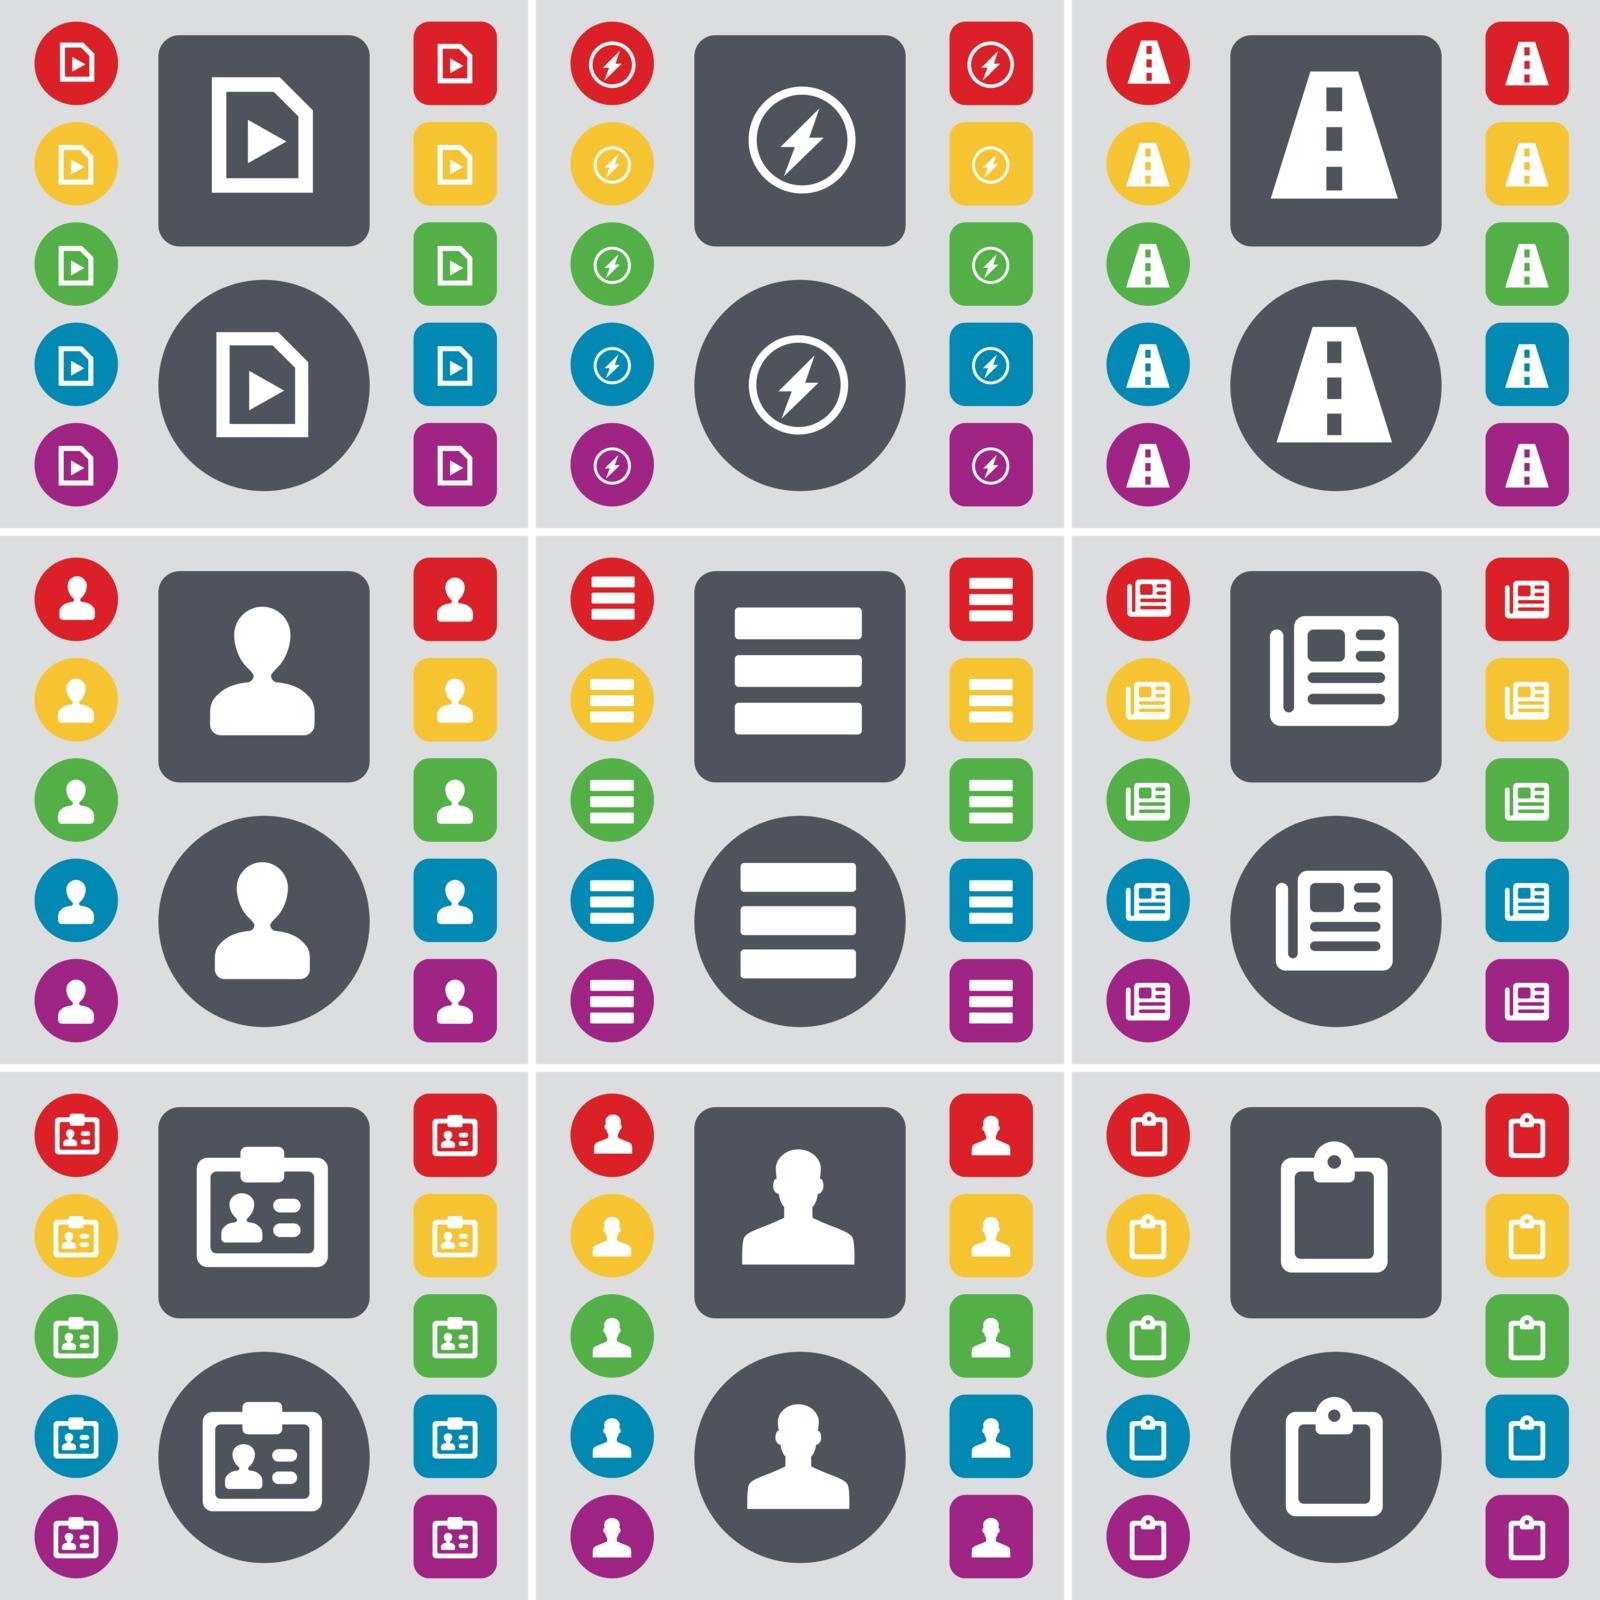 Media play, Flash, Road, Avatar, Apps, Newspaper, Contact, Avatar, Survey icon symbol. A large set of flat, colored buttons for your design. Vector illustration